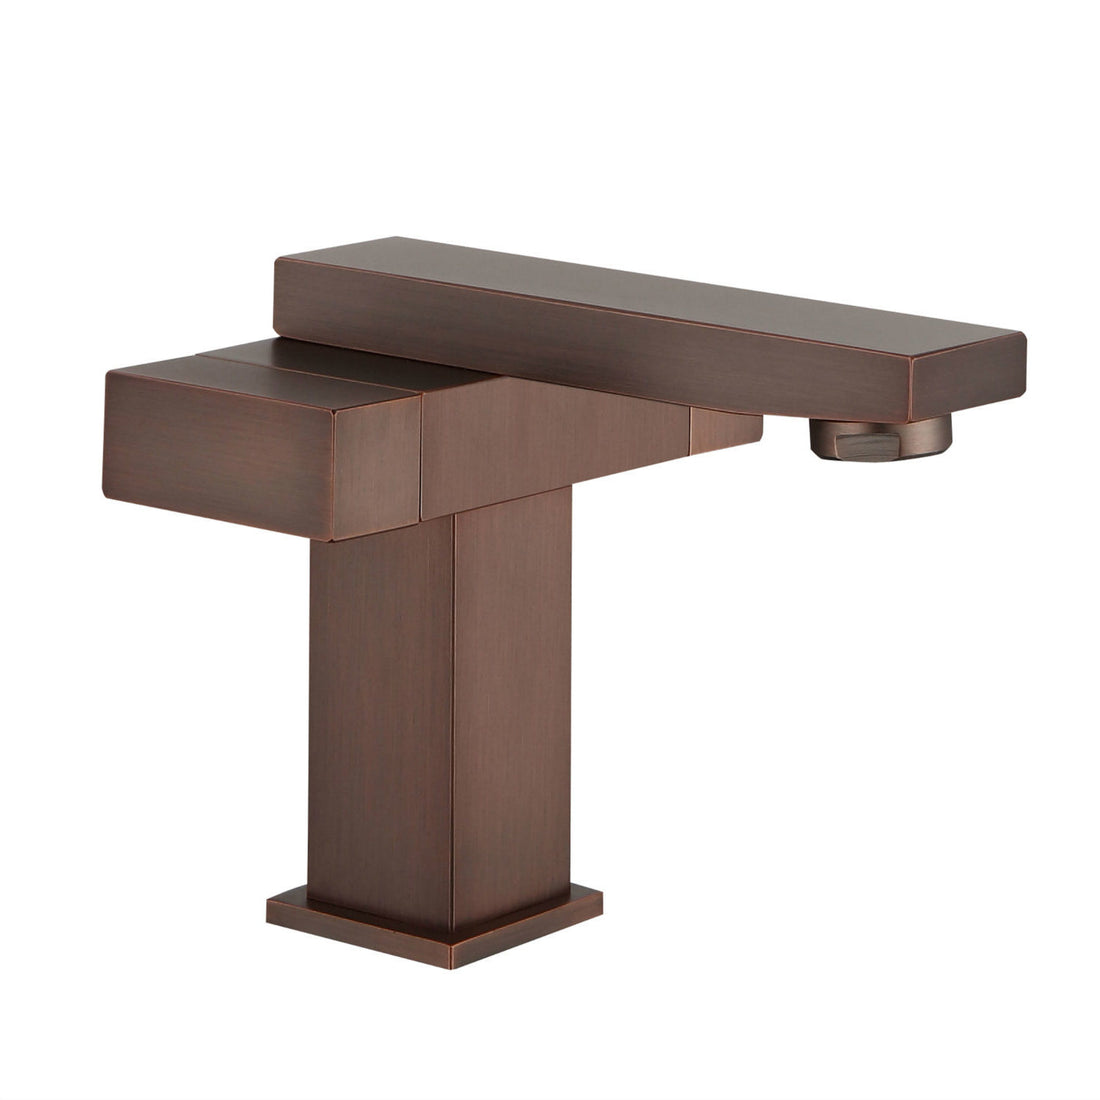 High-Quality Upc Faucet With Drain In Brown Bronze (Zy6051-Bb) - 1 Year Manufacture Defects-Parts Only